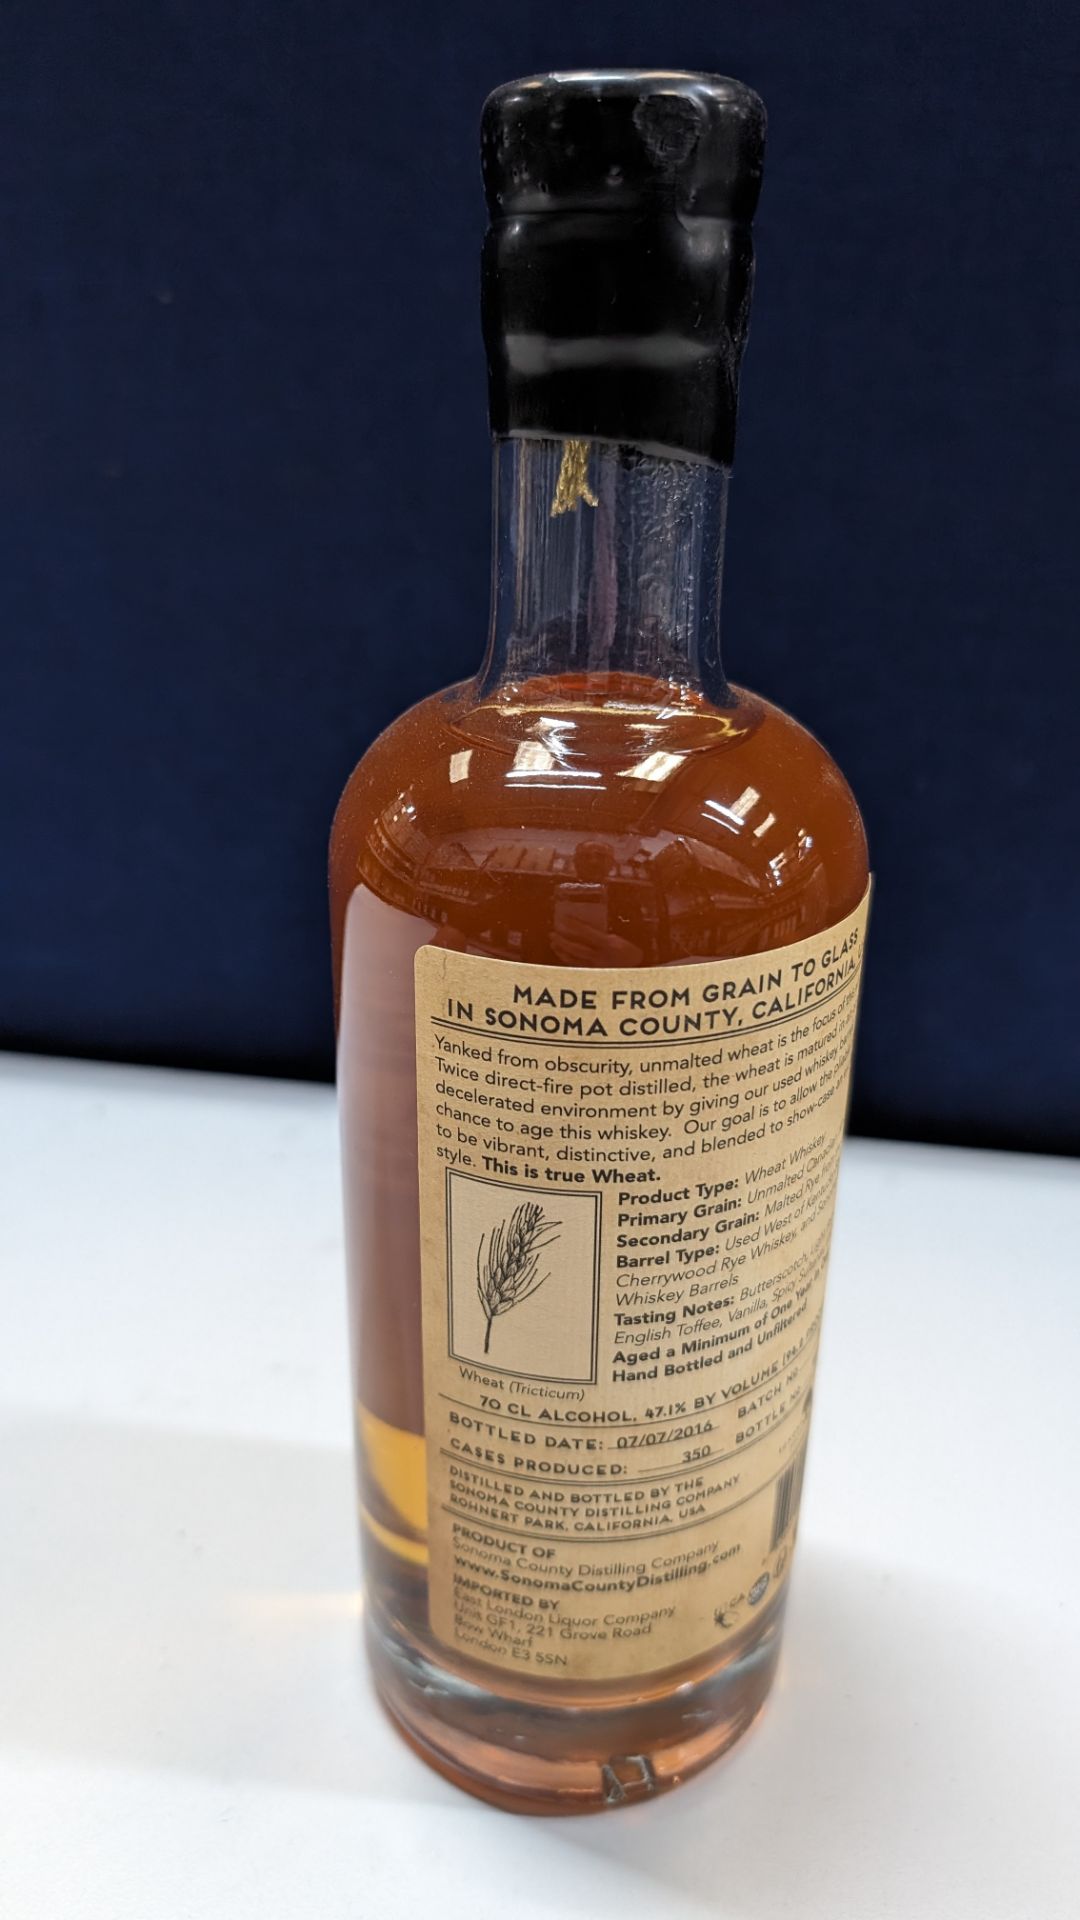 1 off 700ml bottle of Sonoma County 2nd Chance Wheat Double Alembic Pot Distilled Whiskey. 47.1% al - Bild 3 aus 6